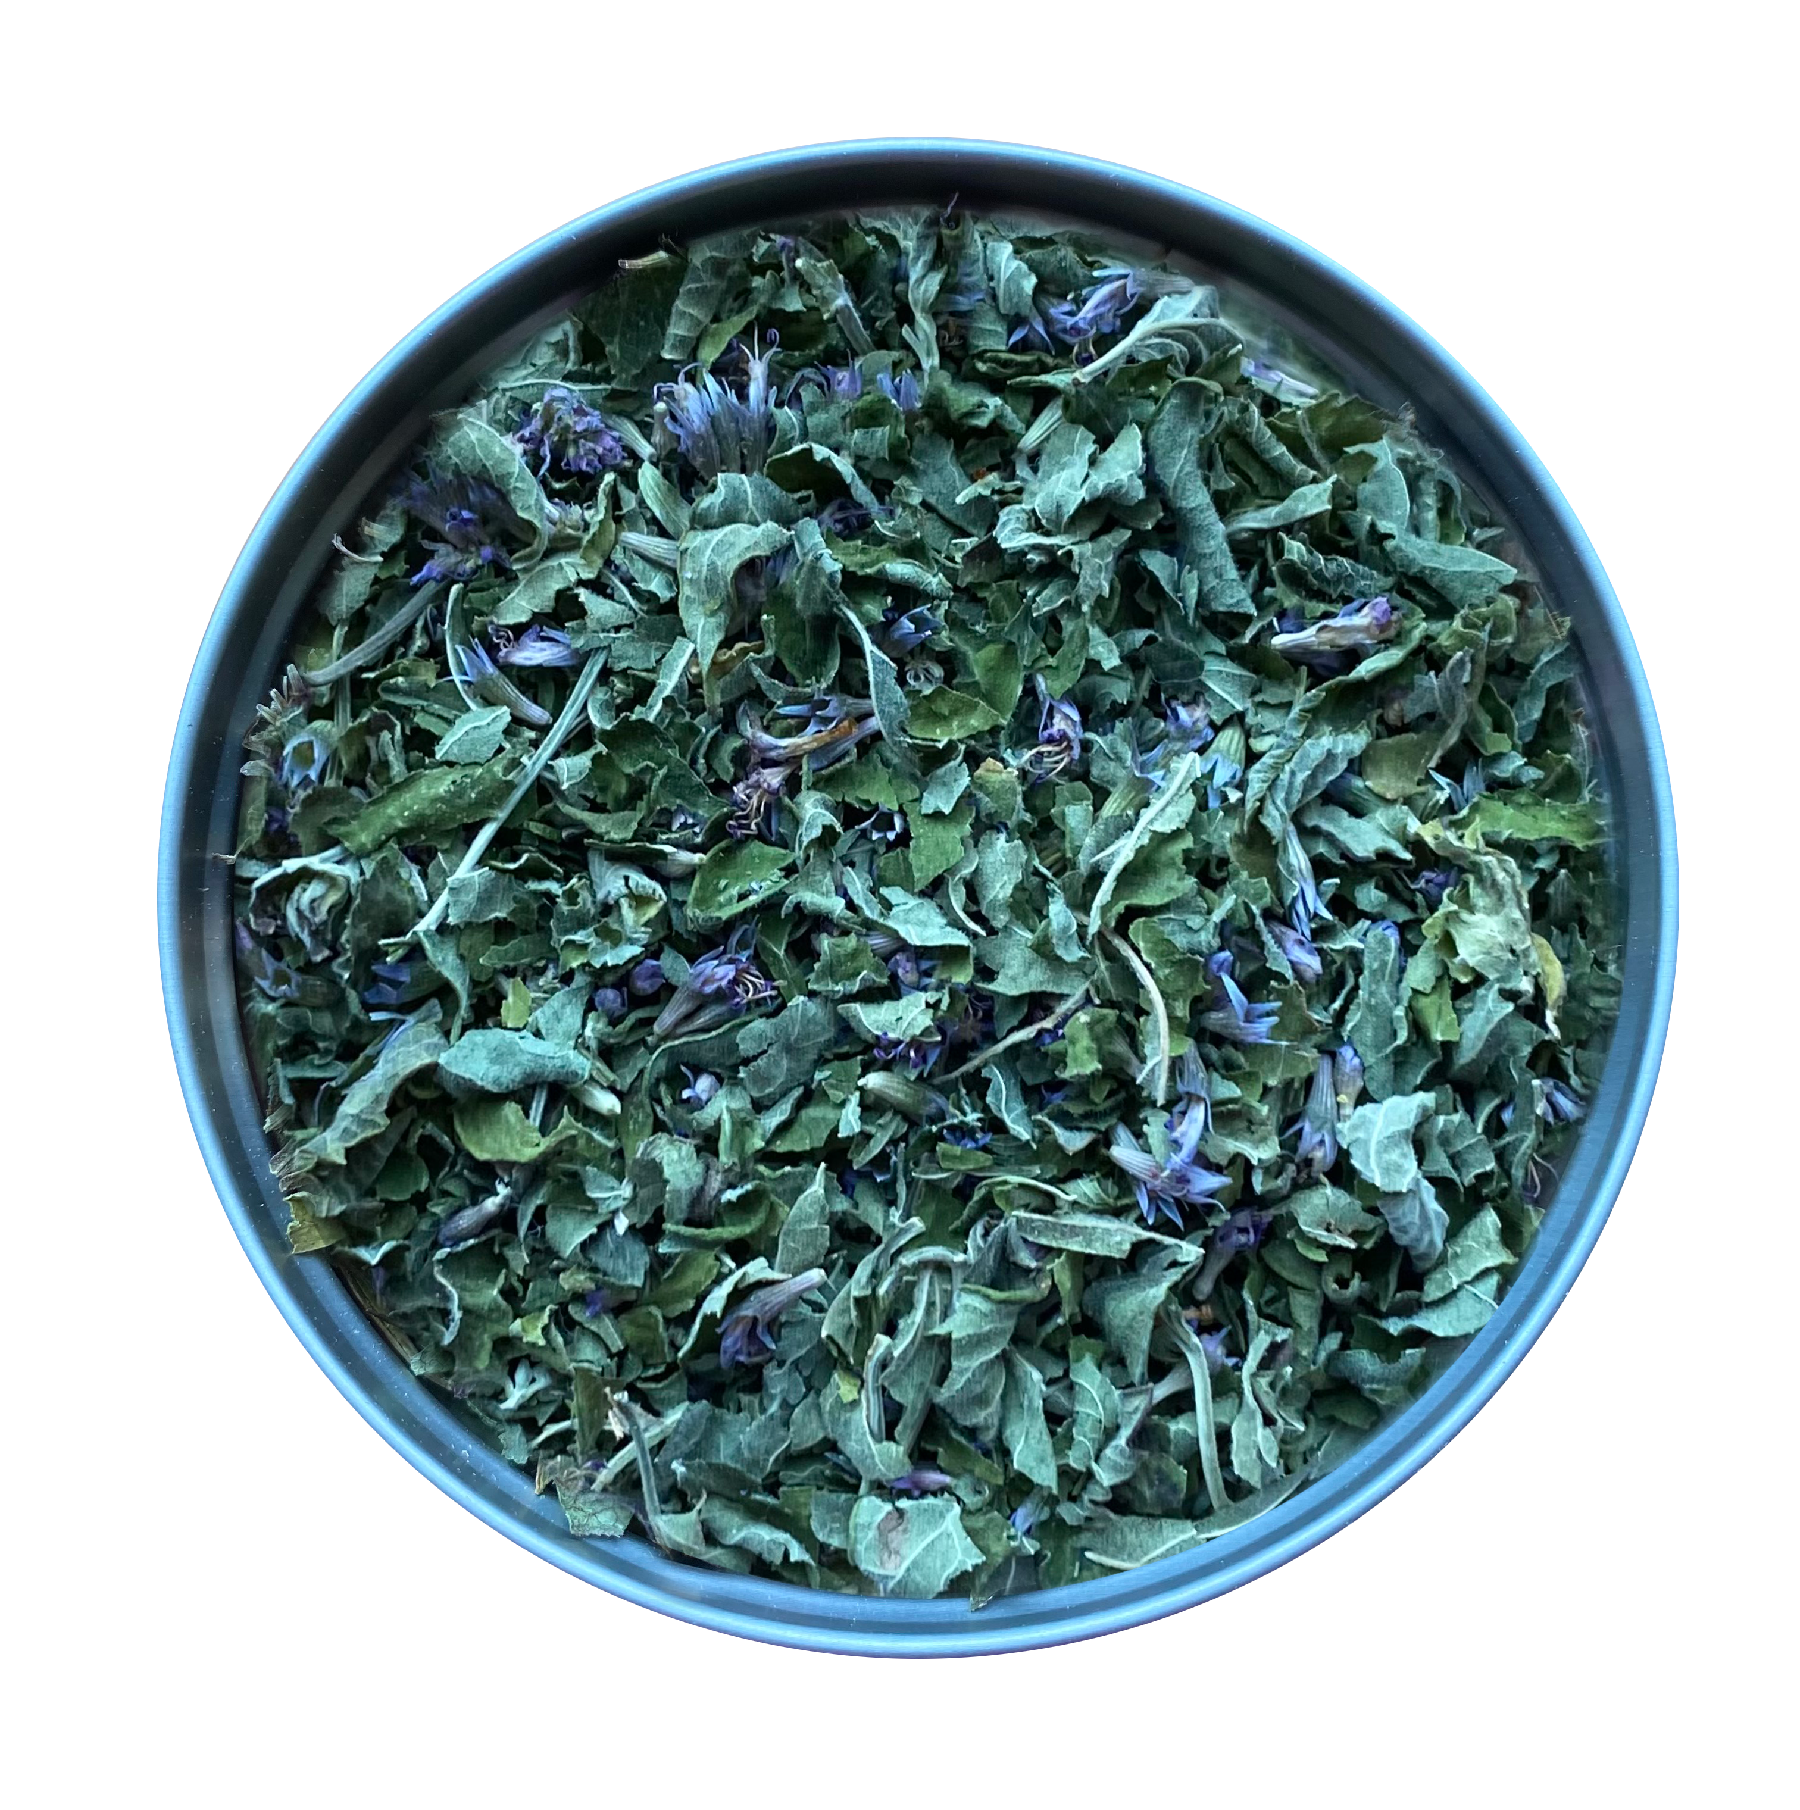 dried anise hyssop